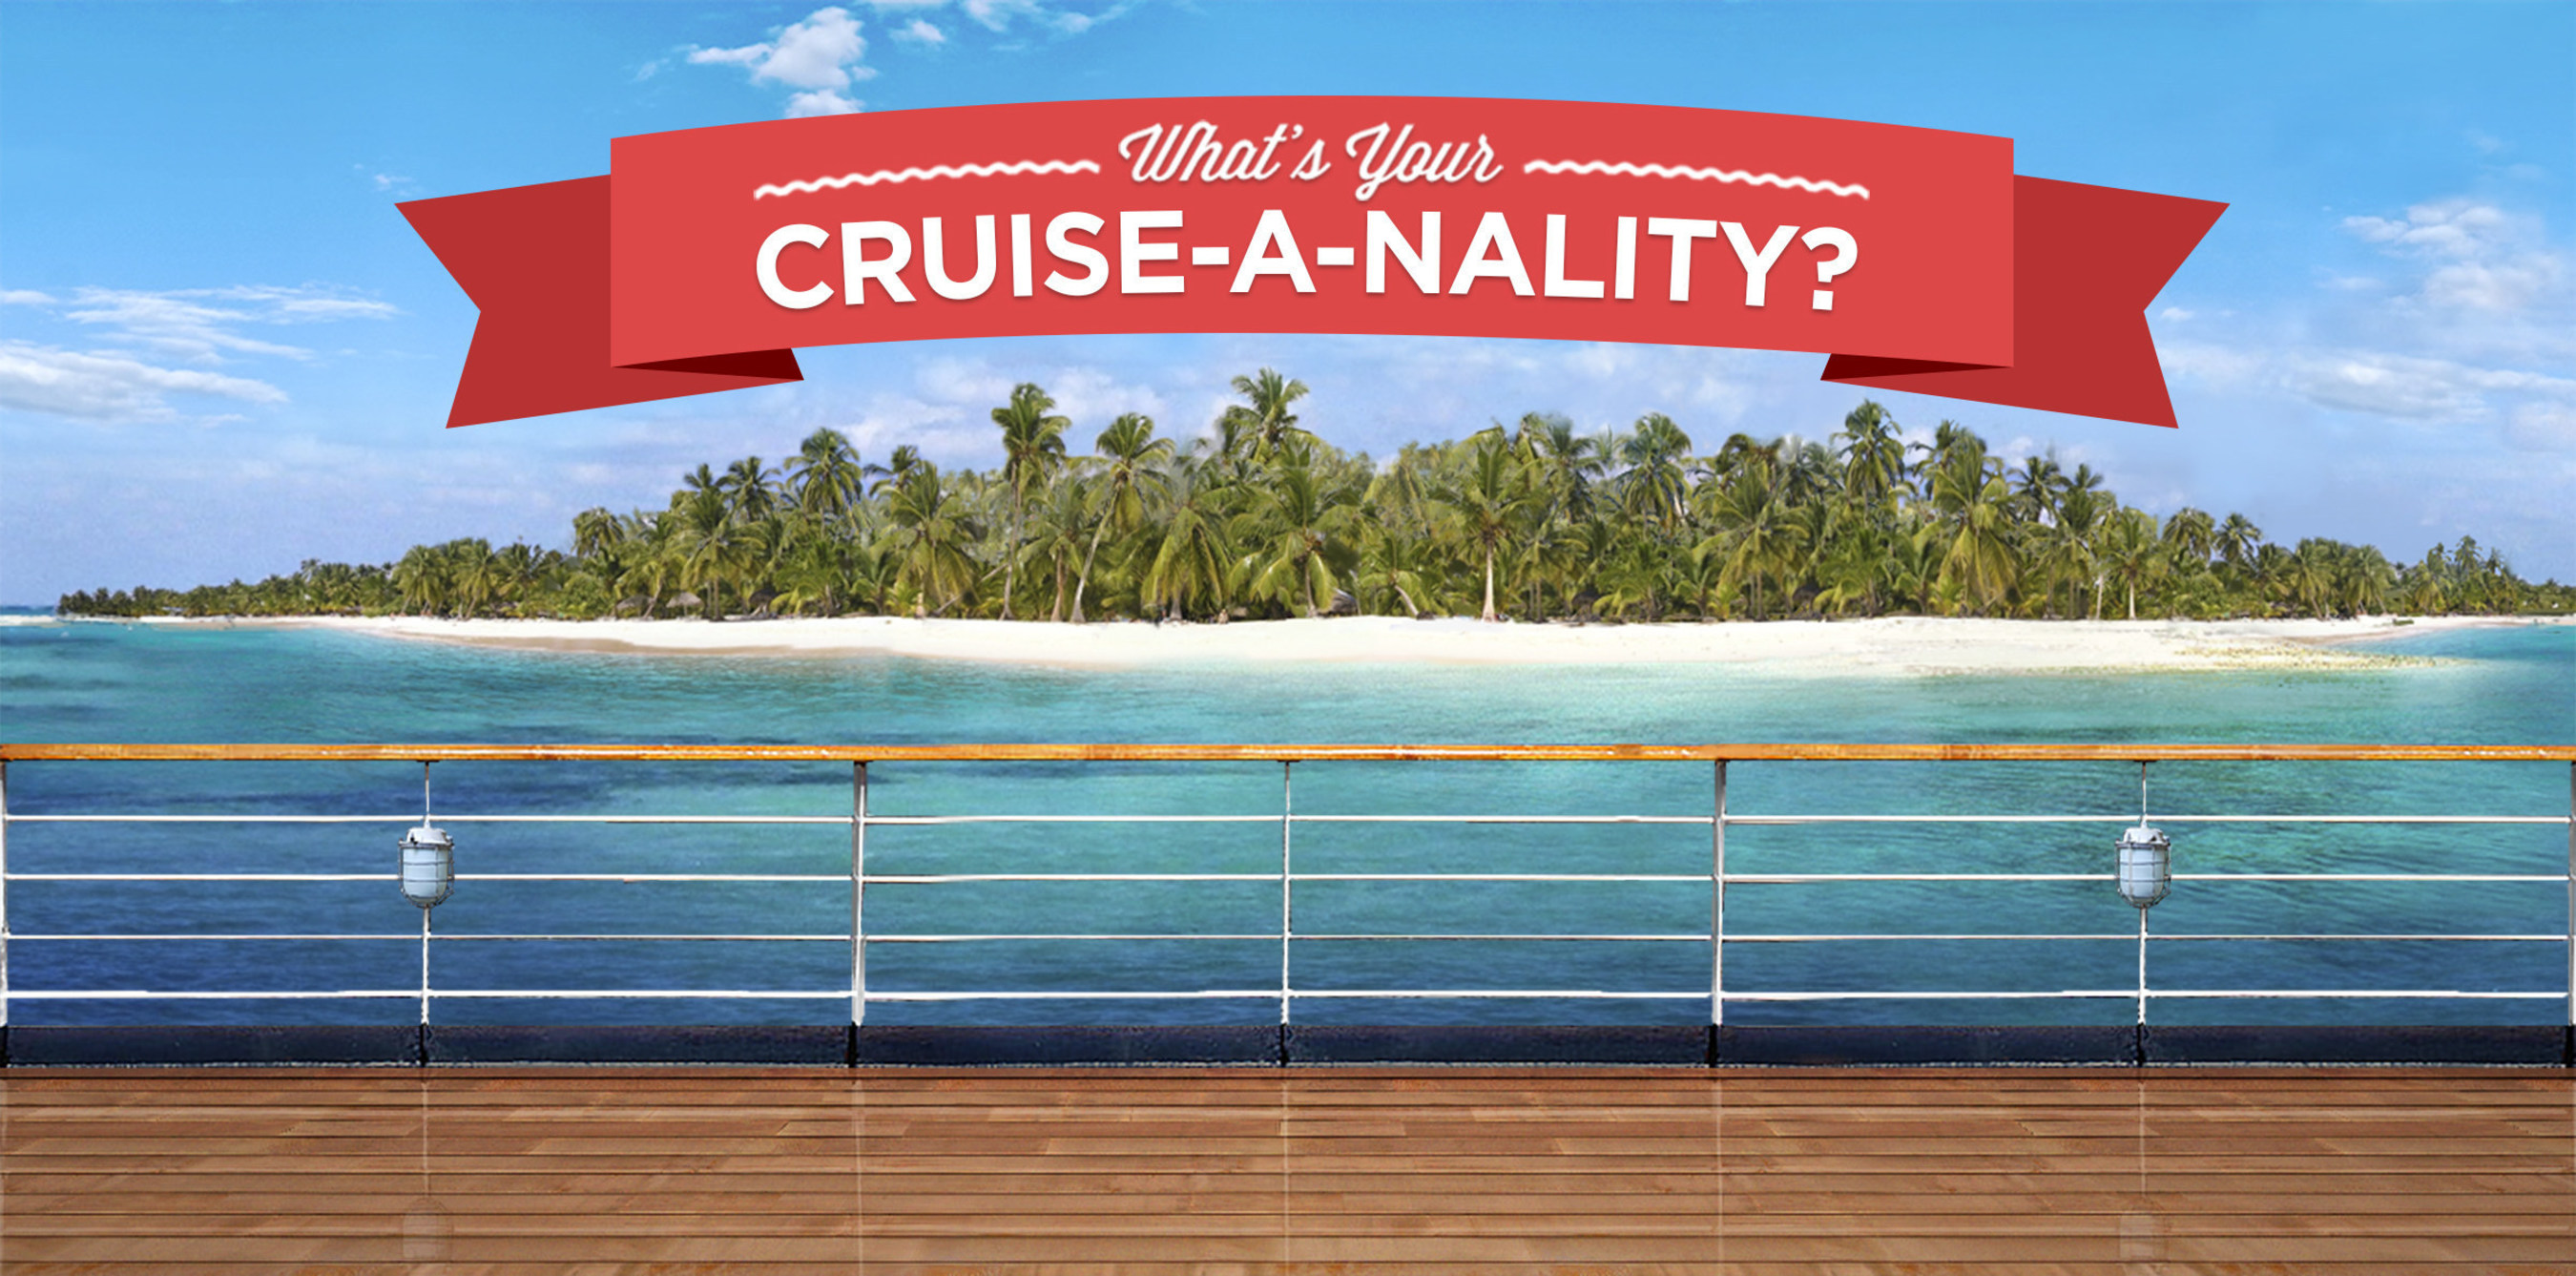 One aspect of Carnival Corporation's WorldsLeadingCruiseLines.com website allows vacationers to find their "CRUISE-A-NALITY," which is an interactive tool to help consumers find their individual cruise persona - type of cruiser based on likes and dislikes - from a total of 30 personas. After answering six simple questions, the CRUISE-A-NALITY tool provides consumers with their persona, cruise brand recommendations and links to find more information to begin planning their vacation.